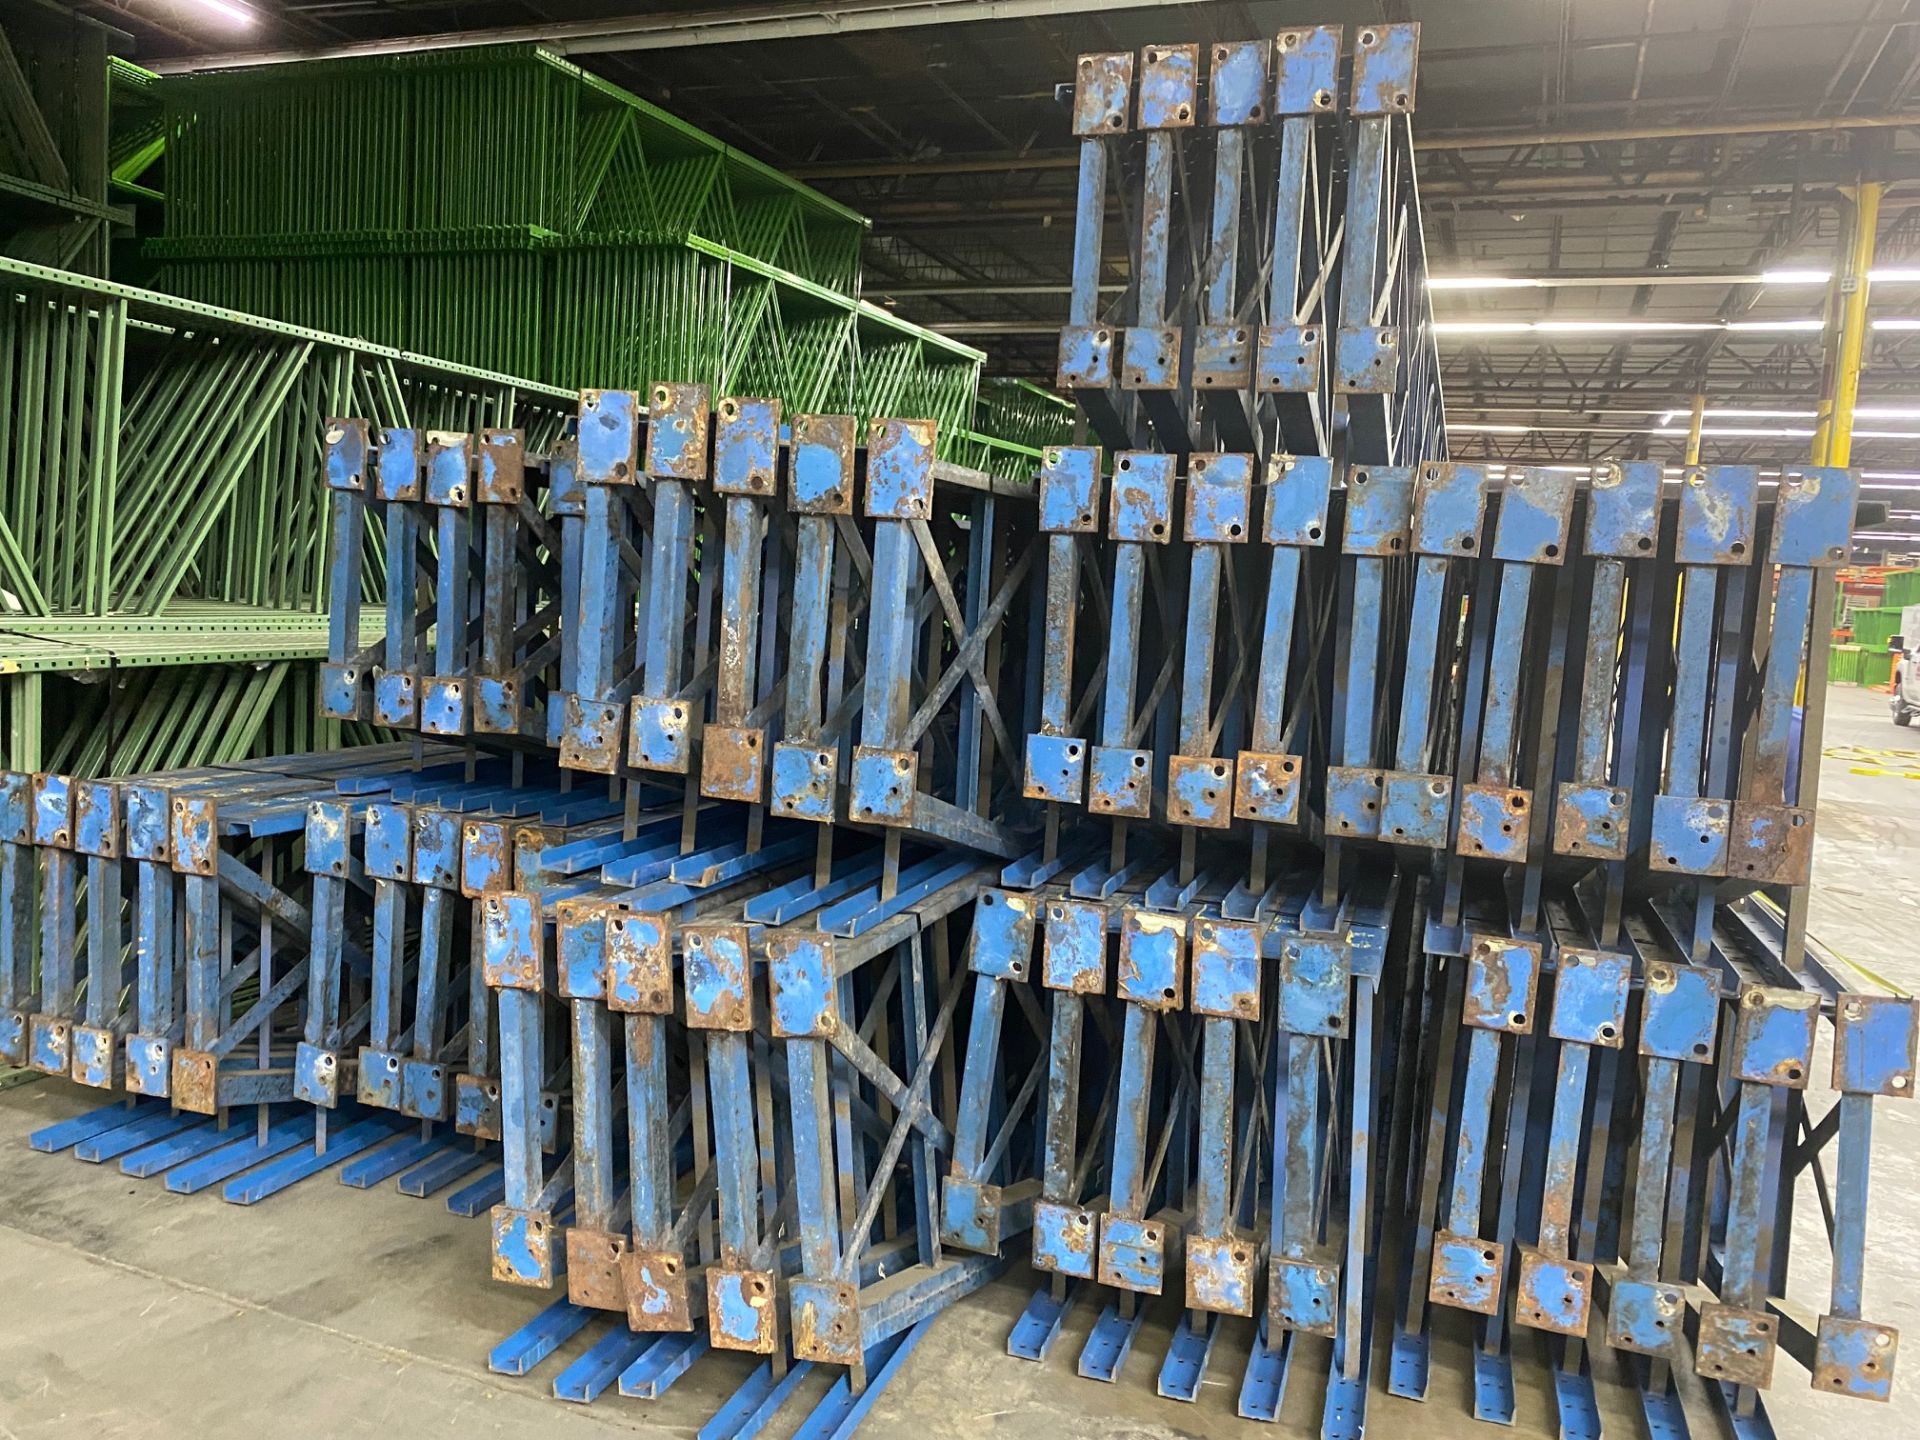 USED 60 PCS OF STRUCTURAL UPRIGHT. SIZE 30'H TO 33'H X 36"D, BLUE - Image 2 of 4